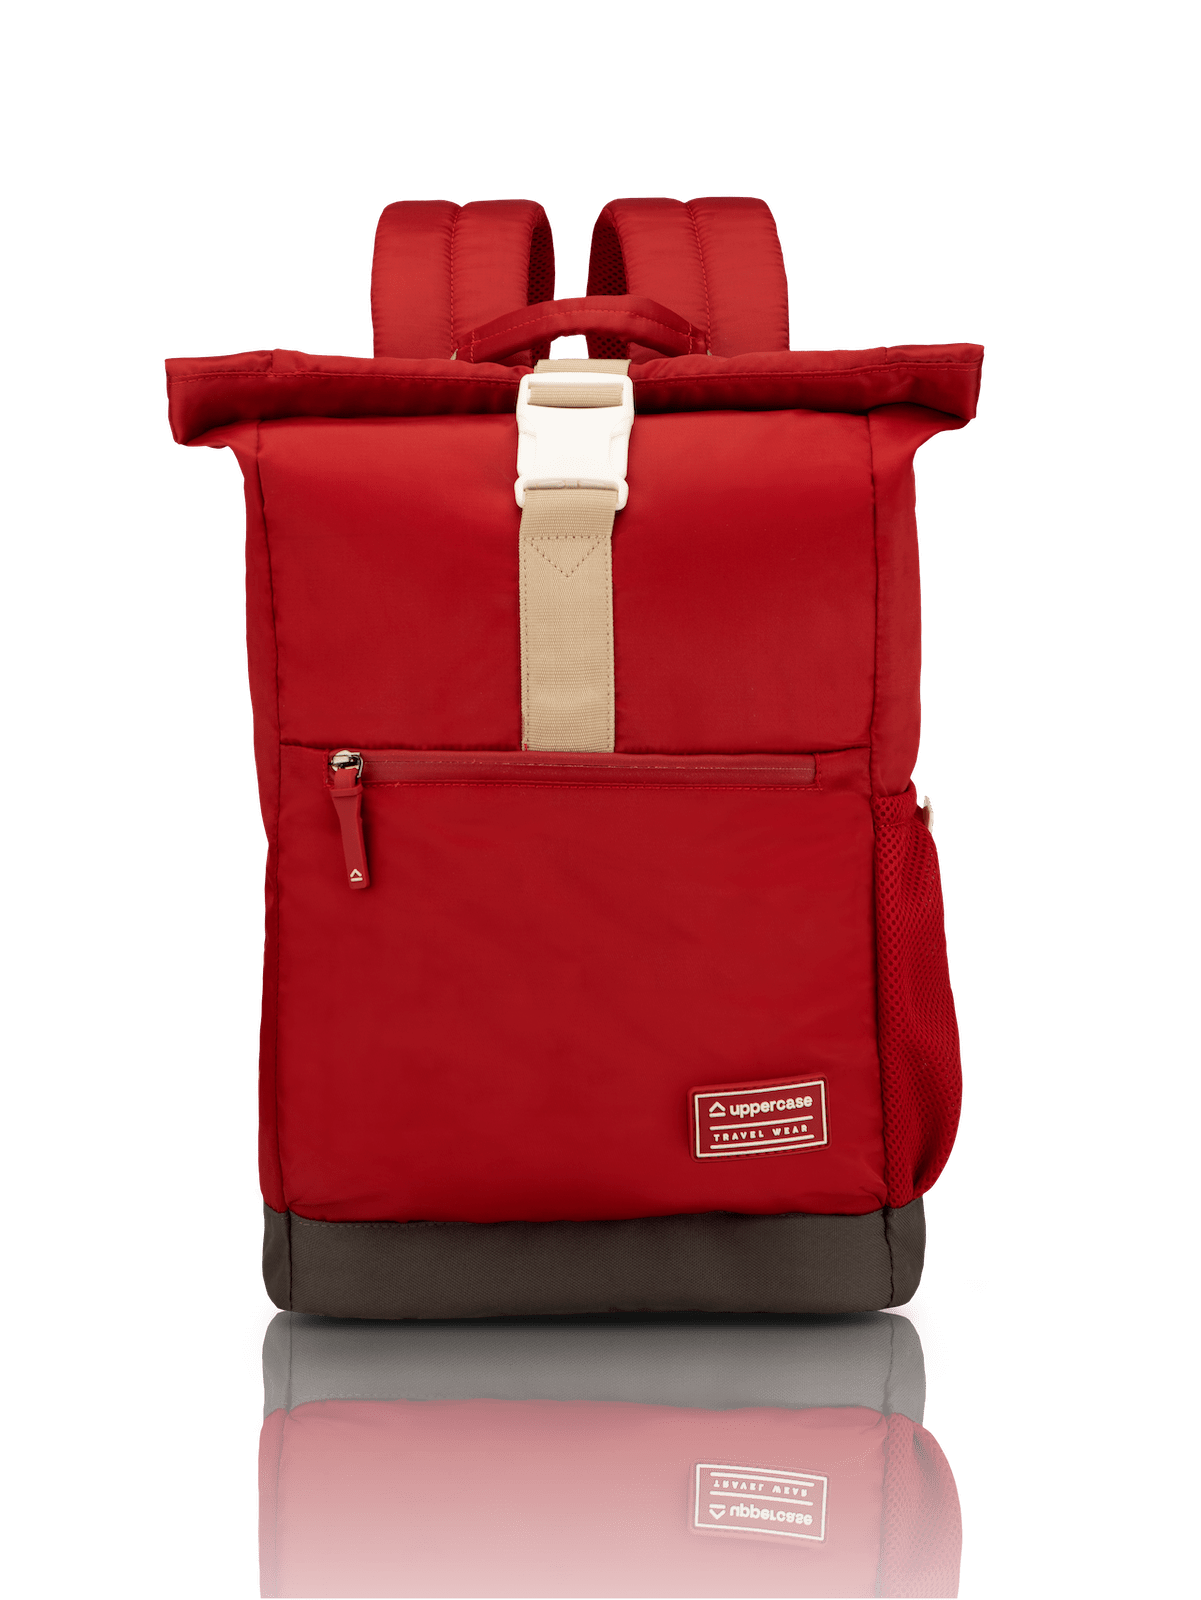 uppercase Roll Top 14.6" Laptop Backpack Water Repellent College Bag 14L Red